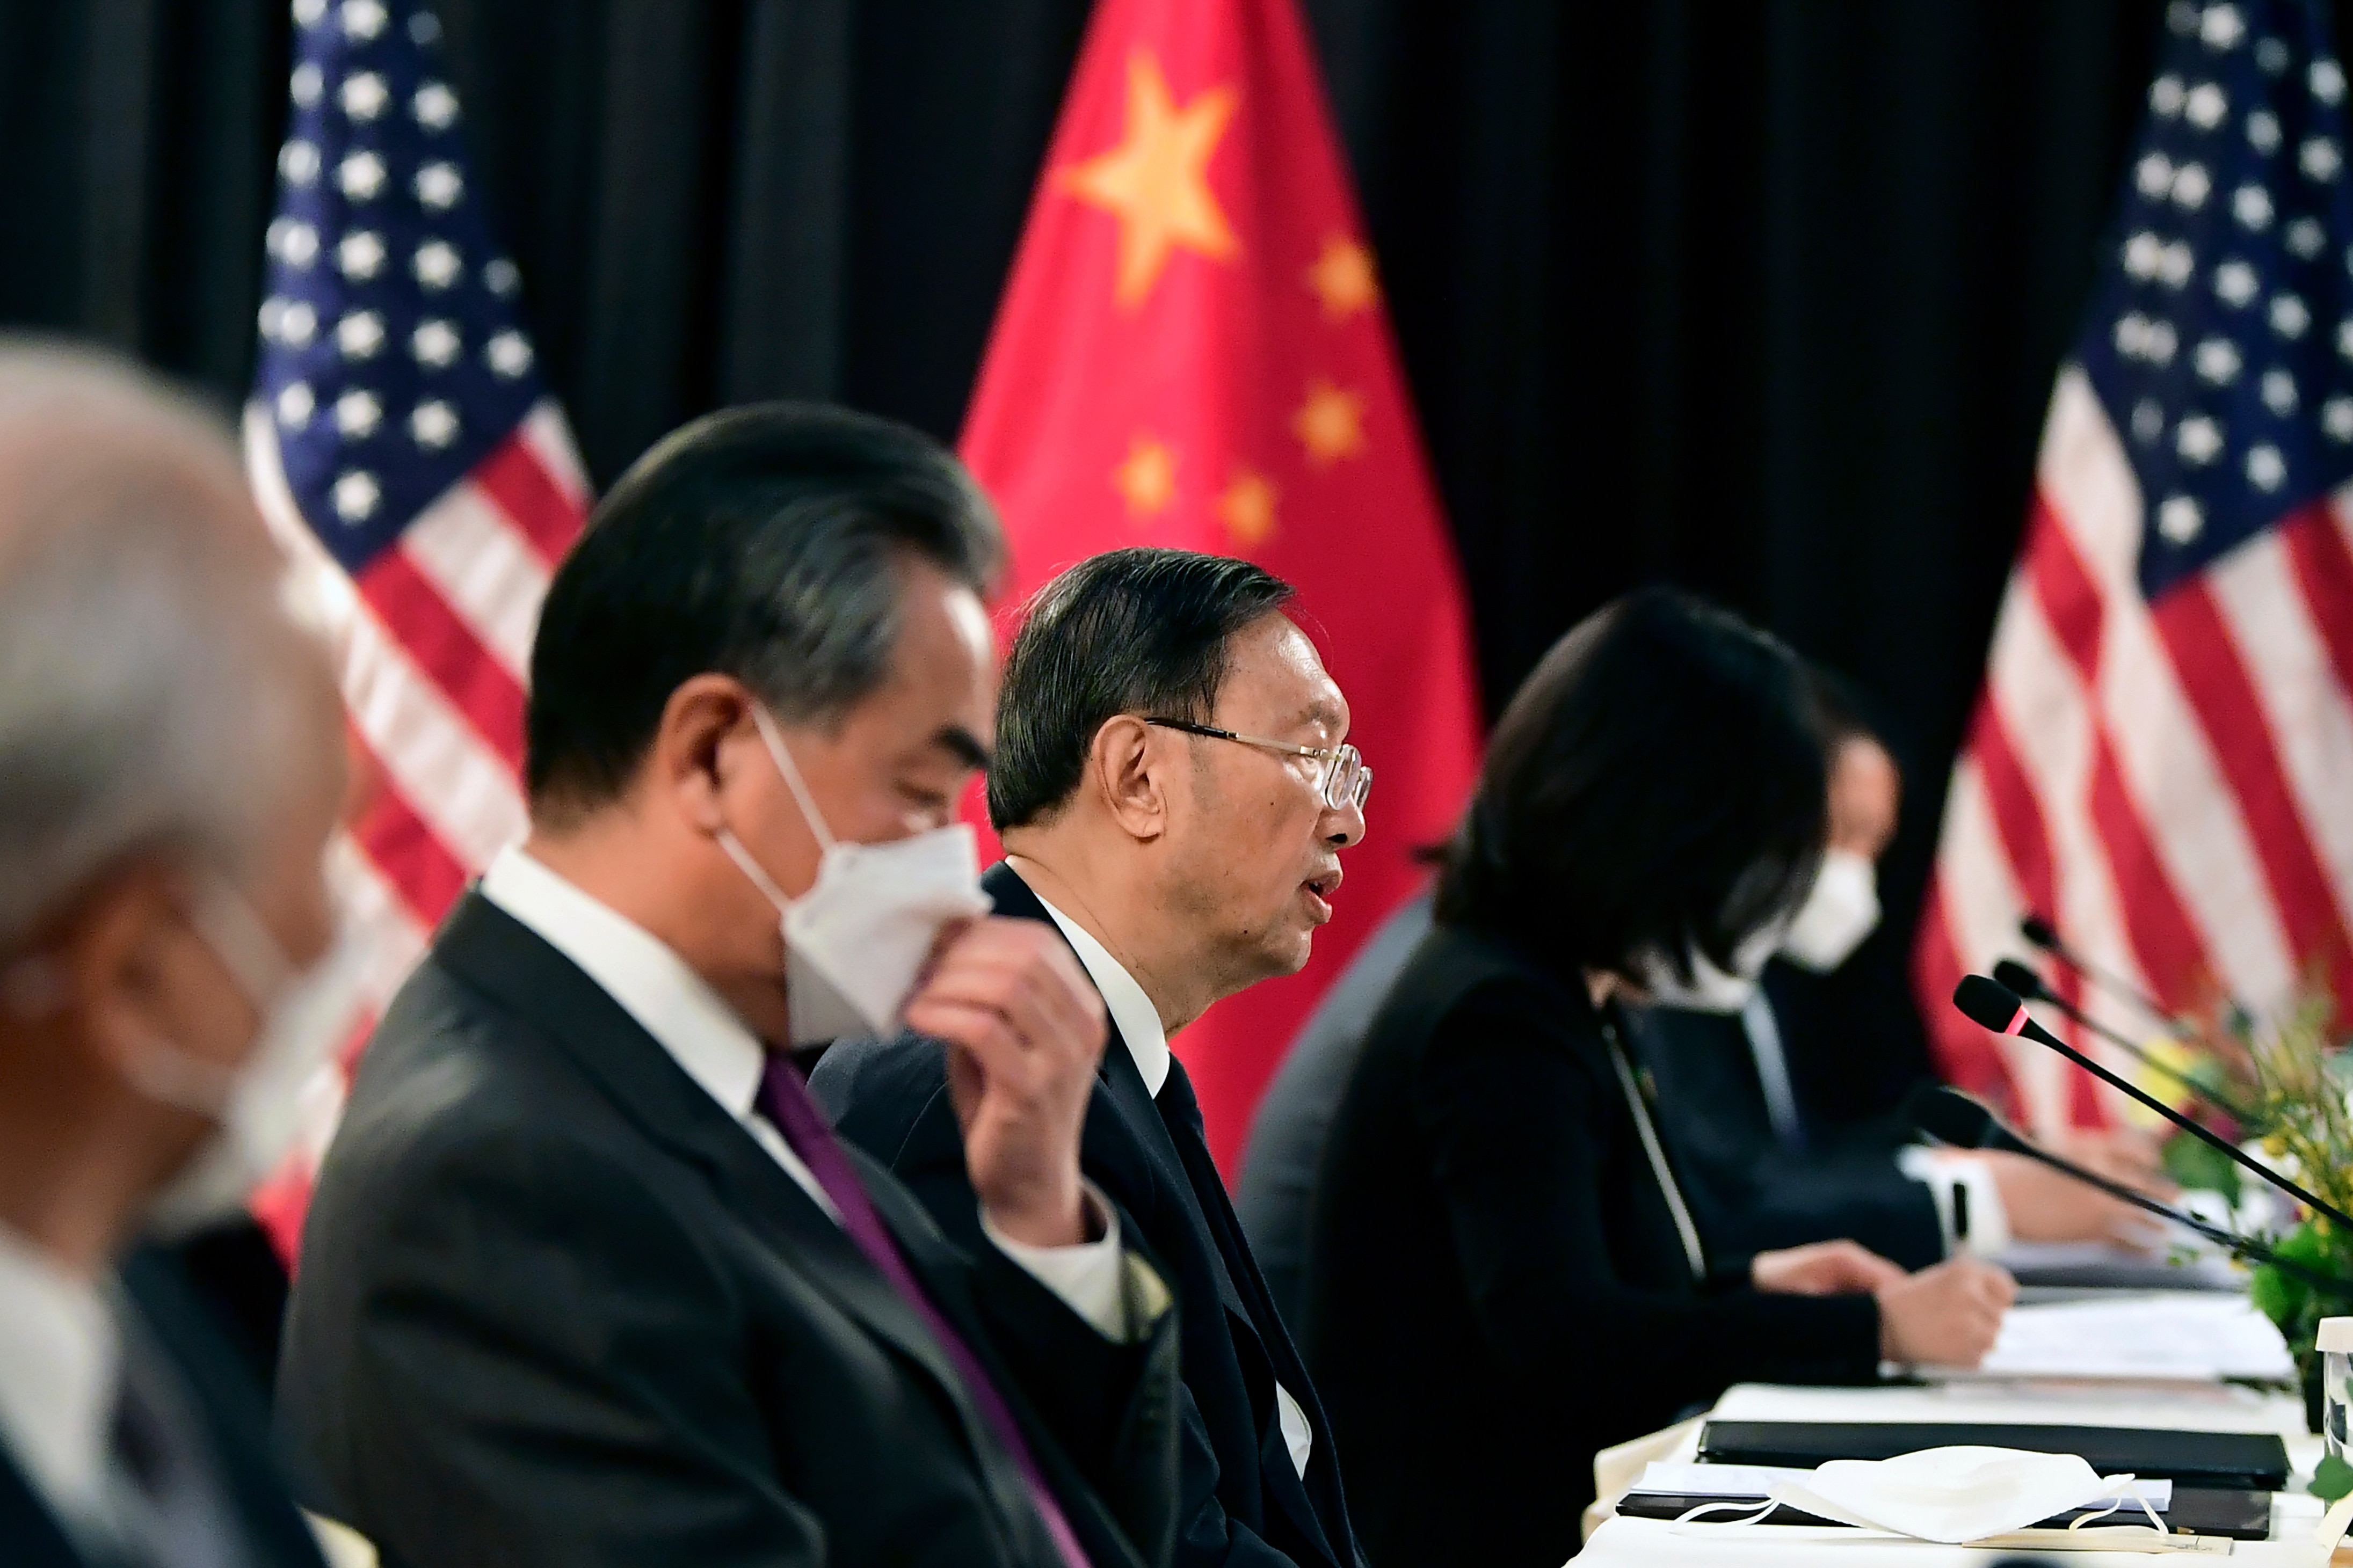 Chinese Communist Party foreign affairs chief Yang Jiechi and State Councilor Wang Yi at the opening session of US-China talks in Alaska, 18 March, 2021.